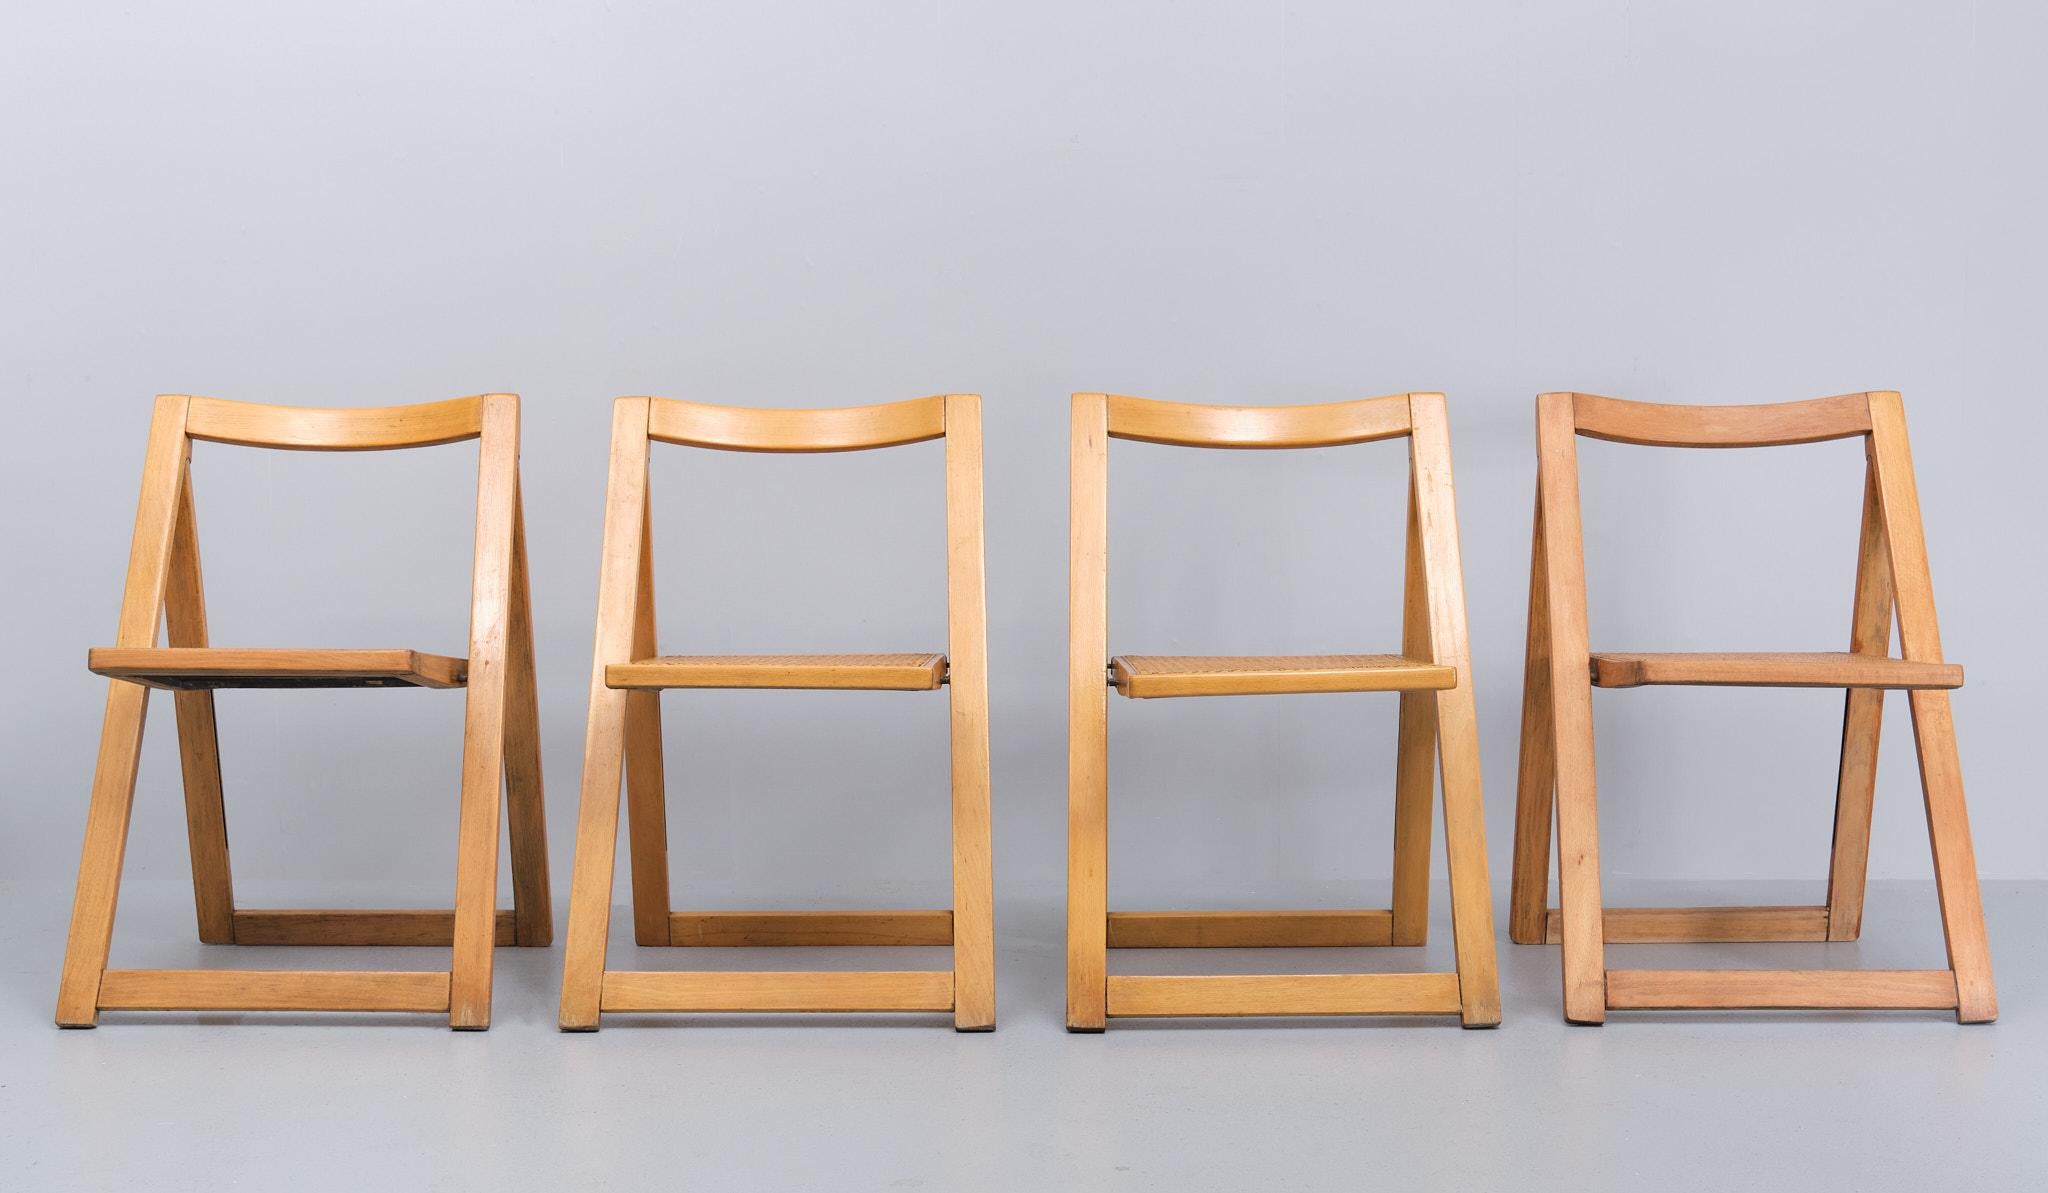 ZMG Thonet Beech wood Folding chairs 1950s  In Good Condition For Sale In Den Haag, NL